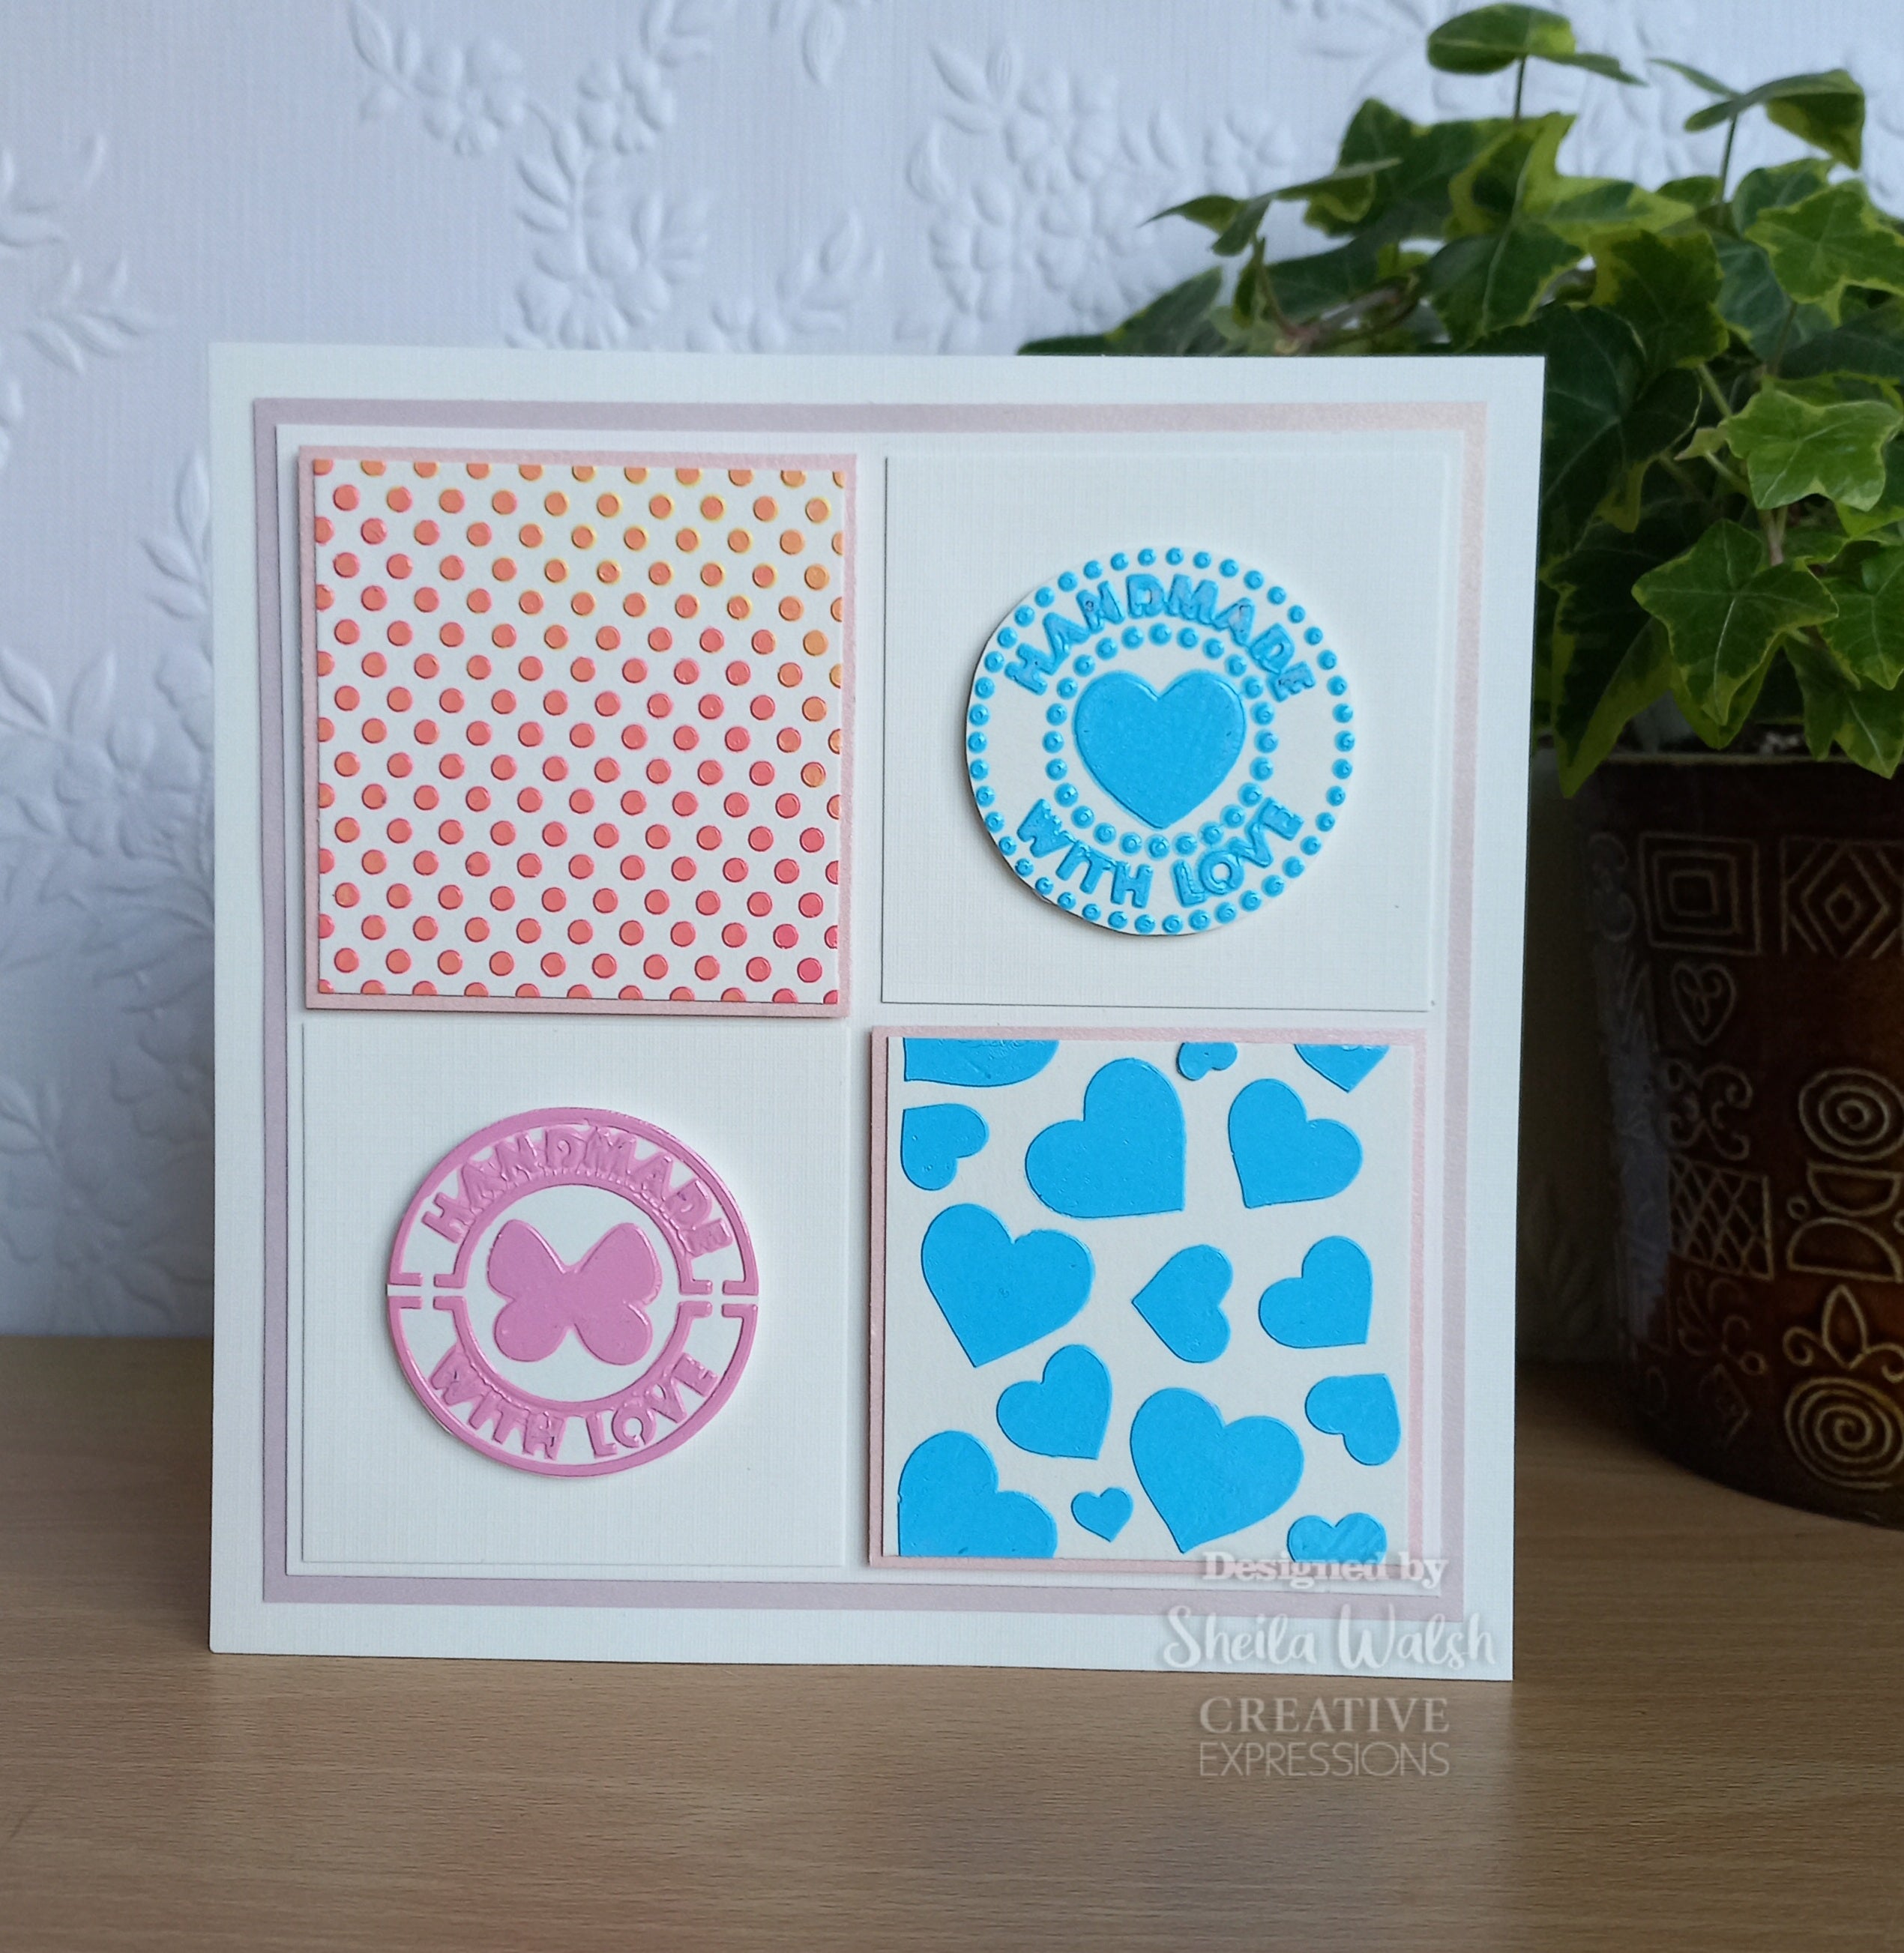 Creative Expressions Mini Stencil Scattered Hearts 4.0 in x 3.0 in